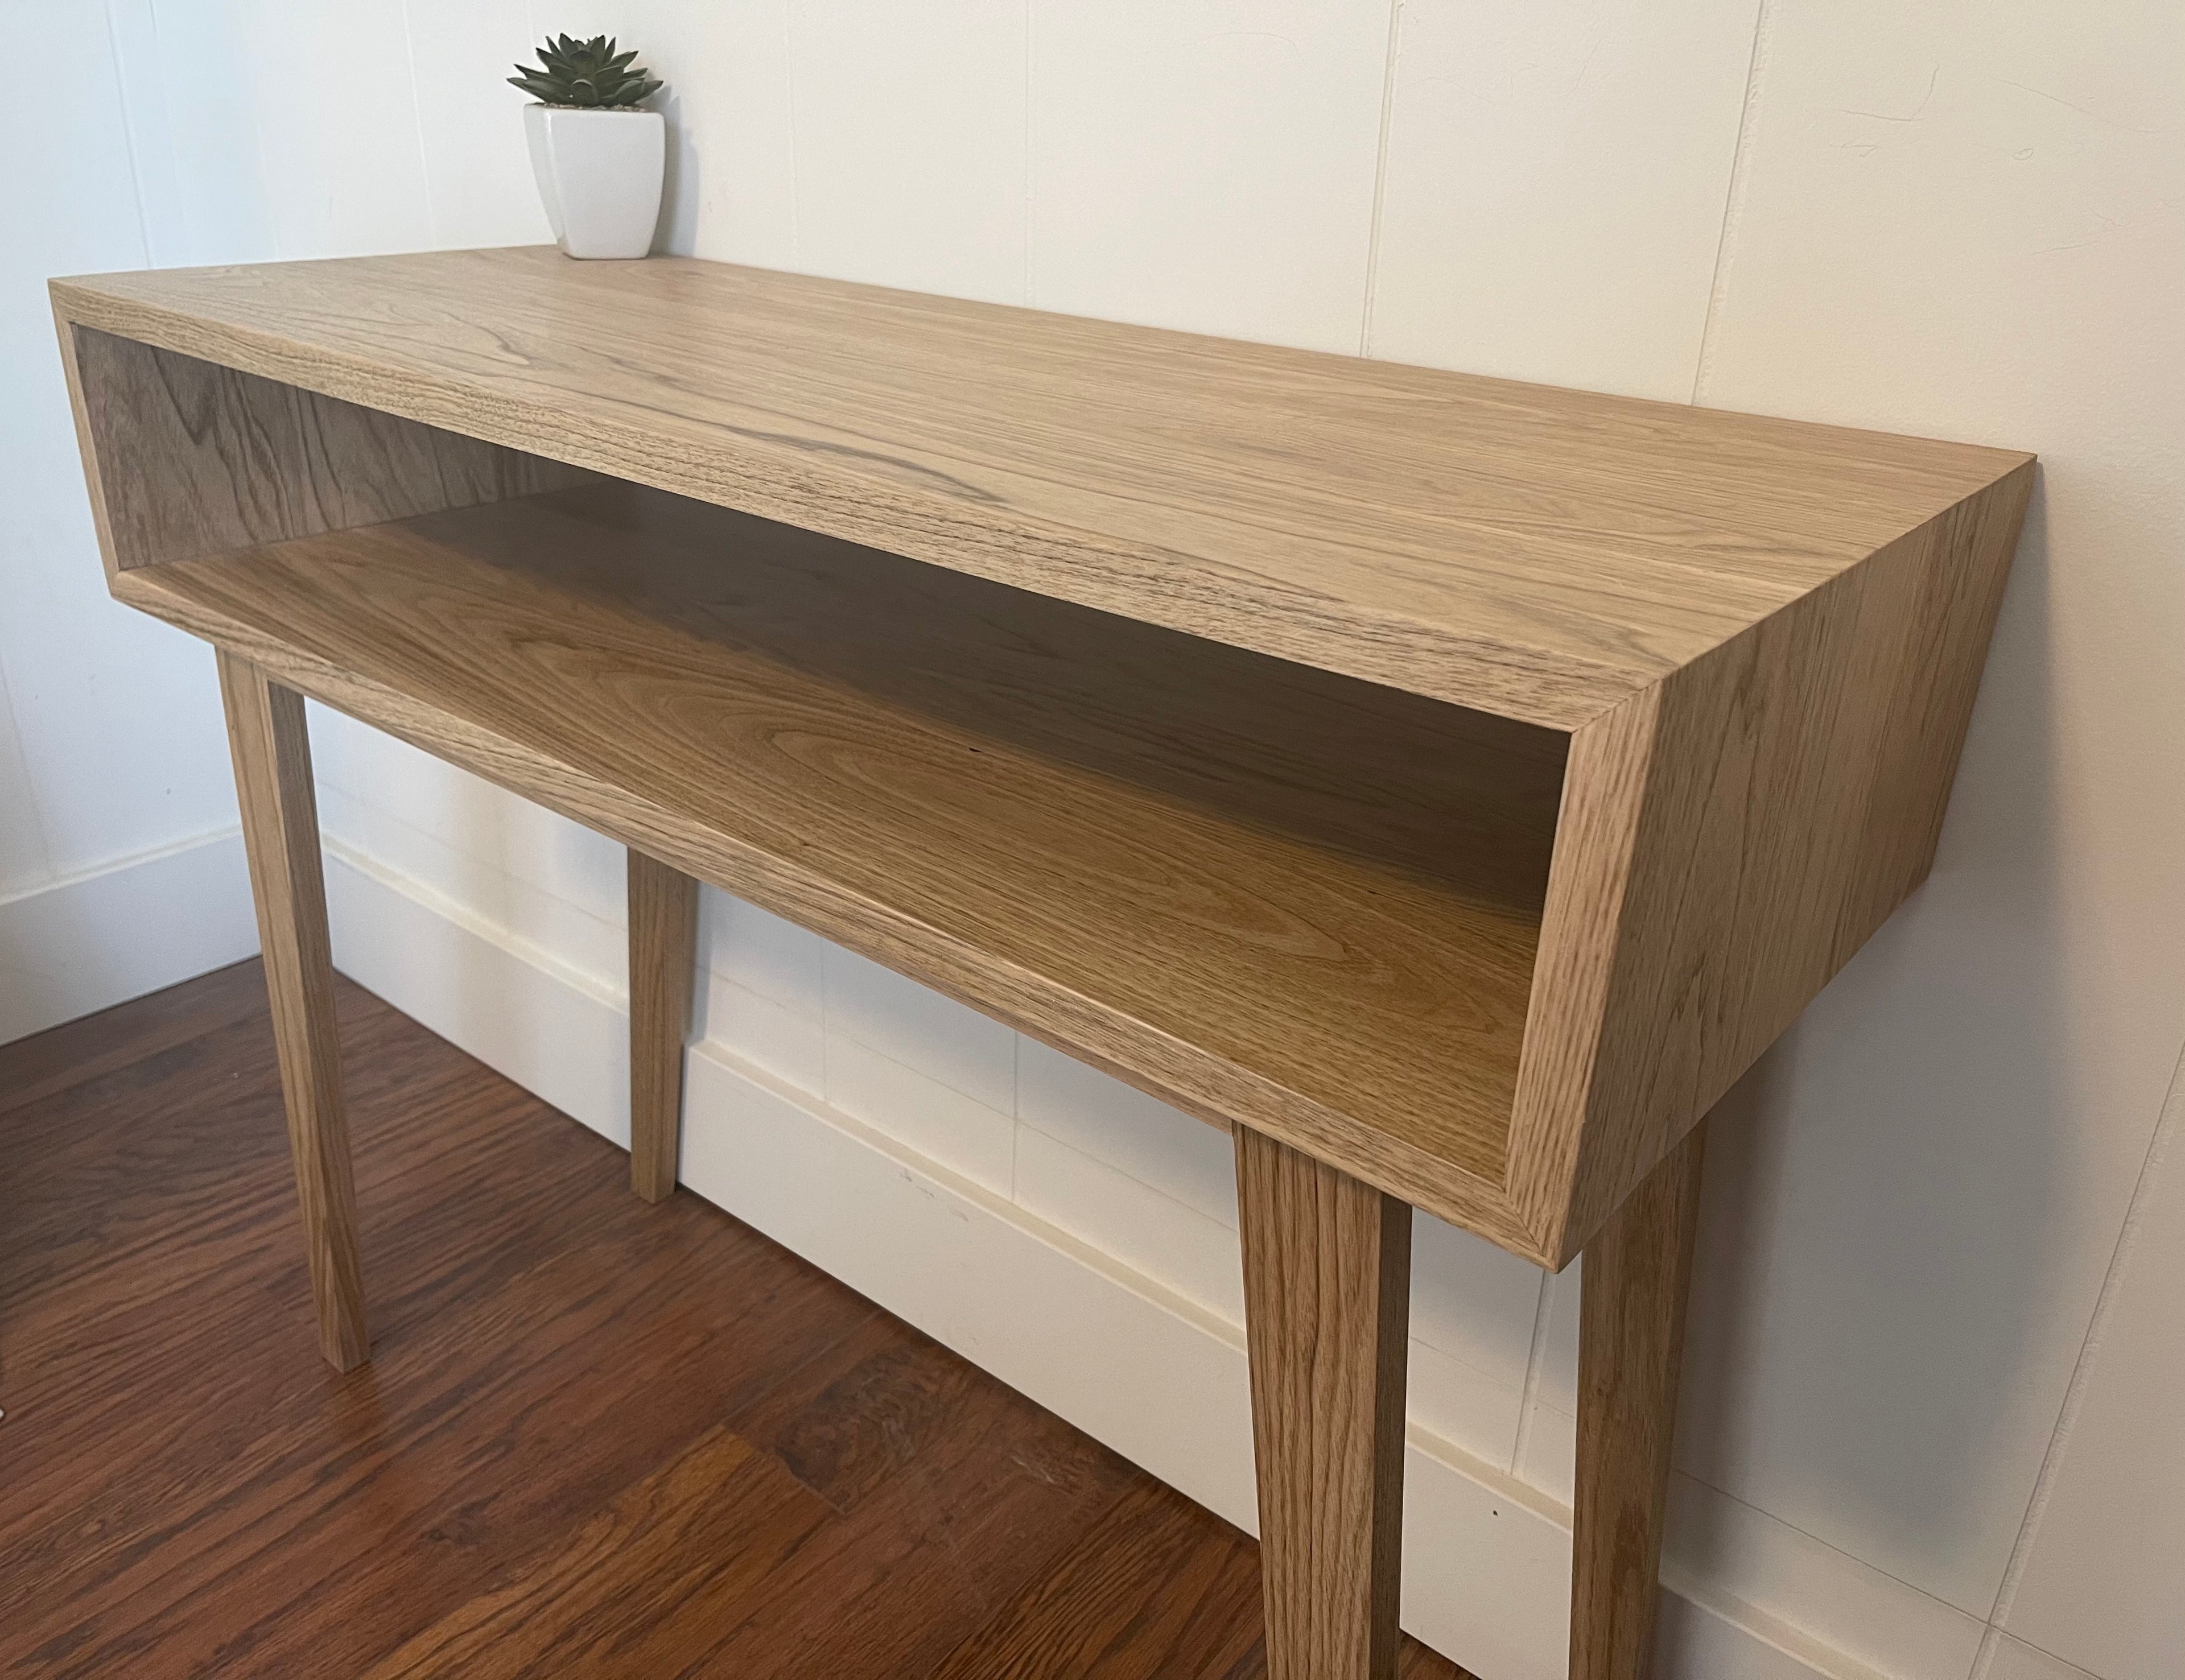 A picture of a custom made mid-century modern desk.  The desk is made out of butternut wood.  This is a gentle, creamy colored wood.